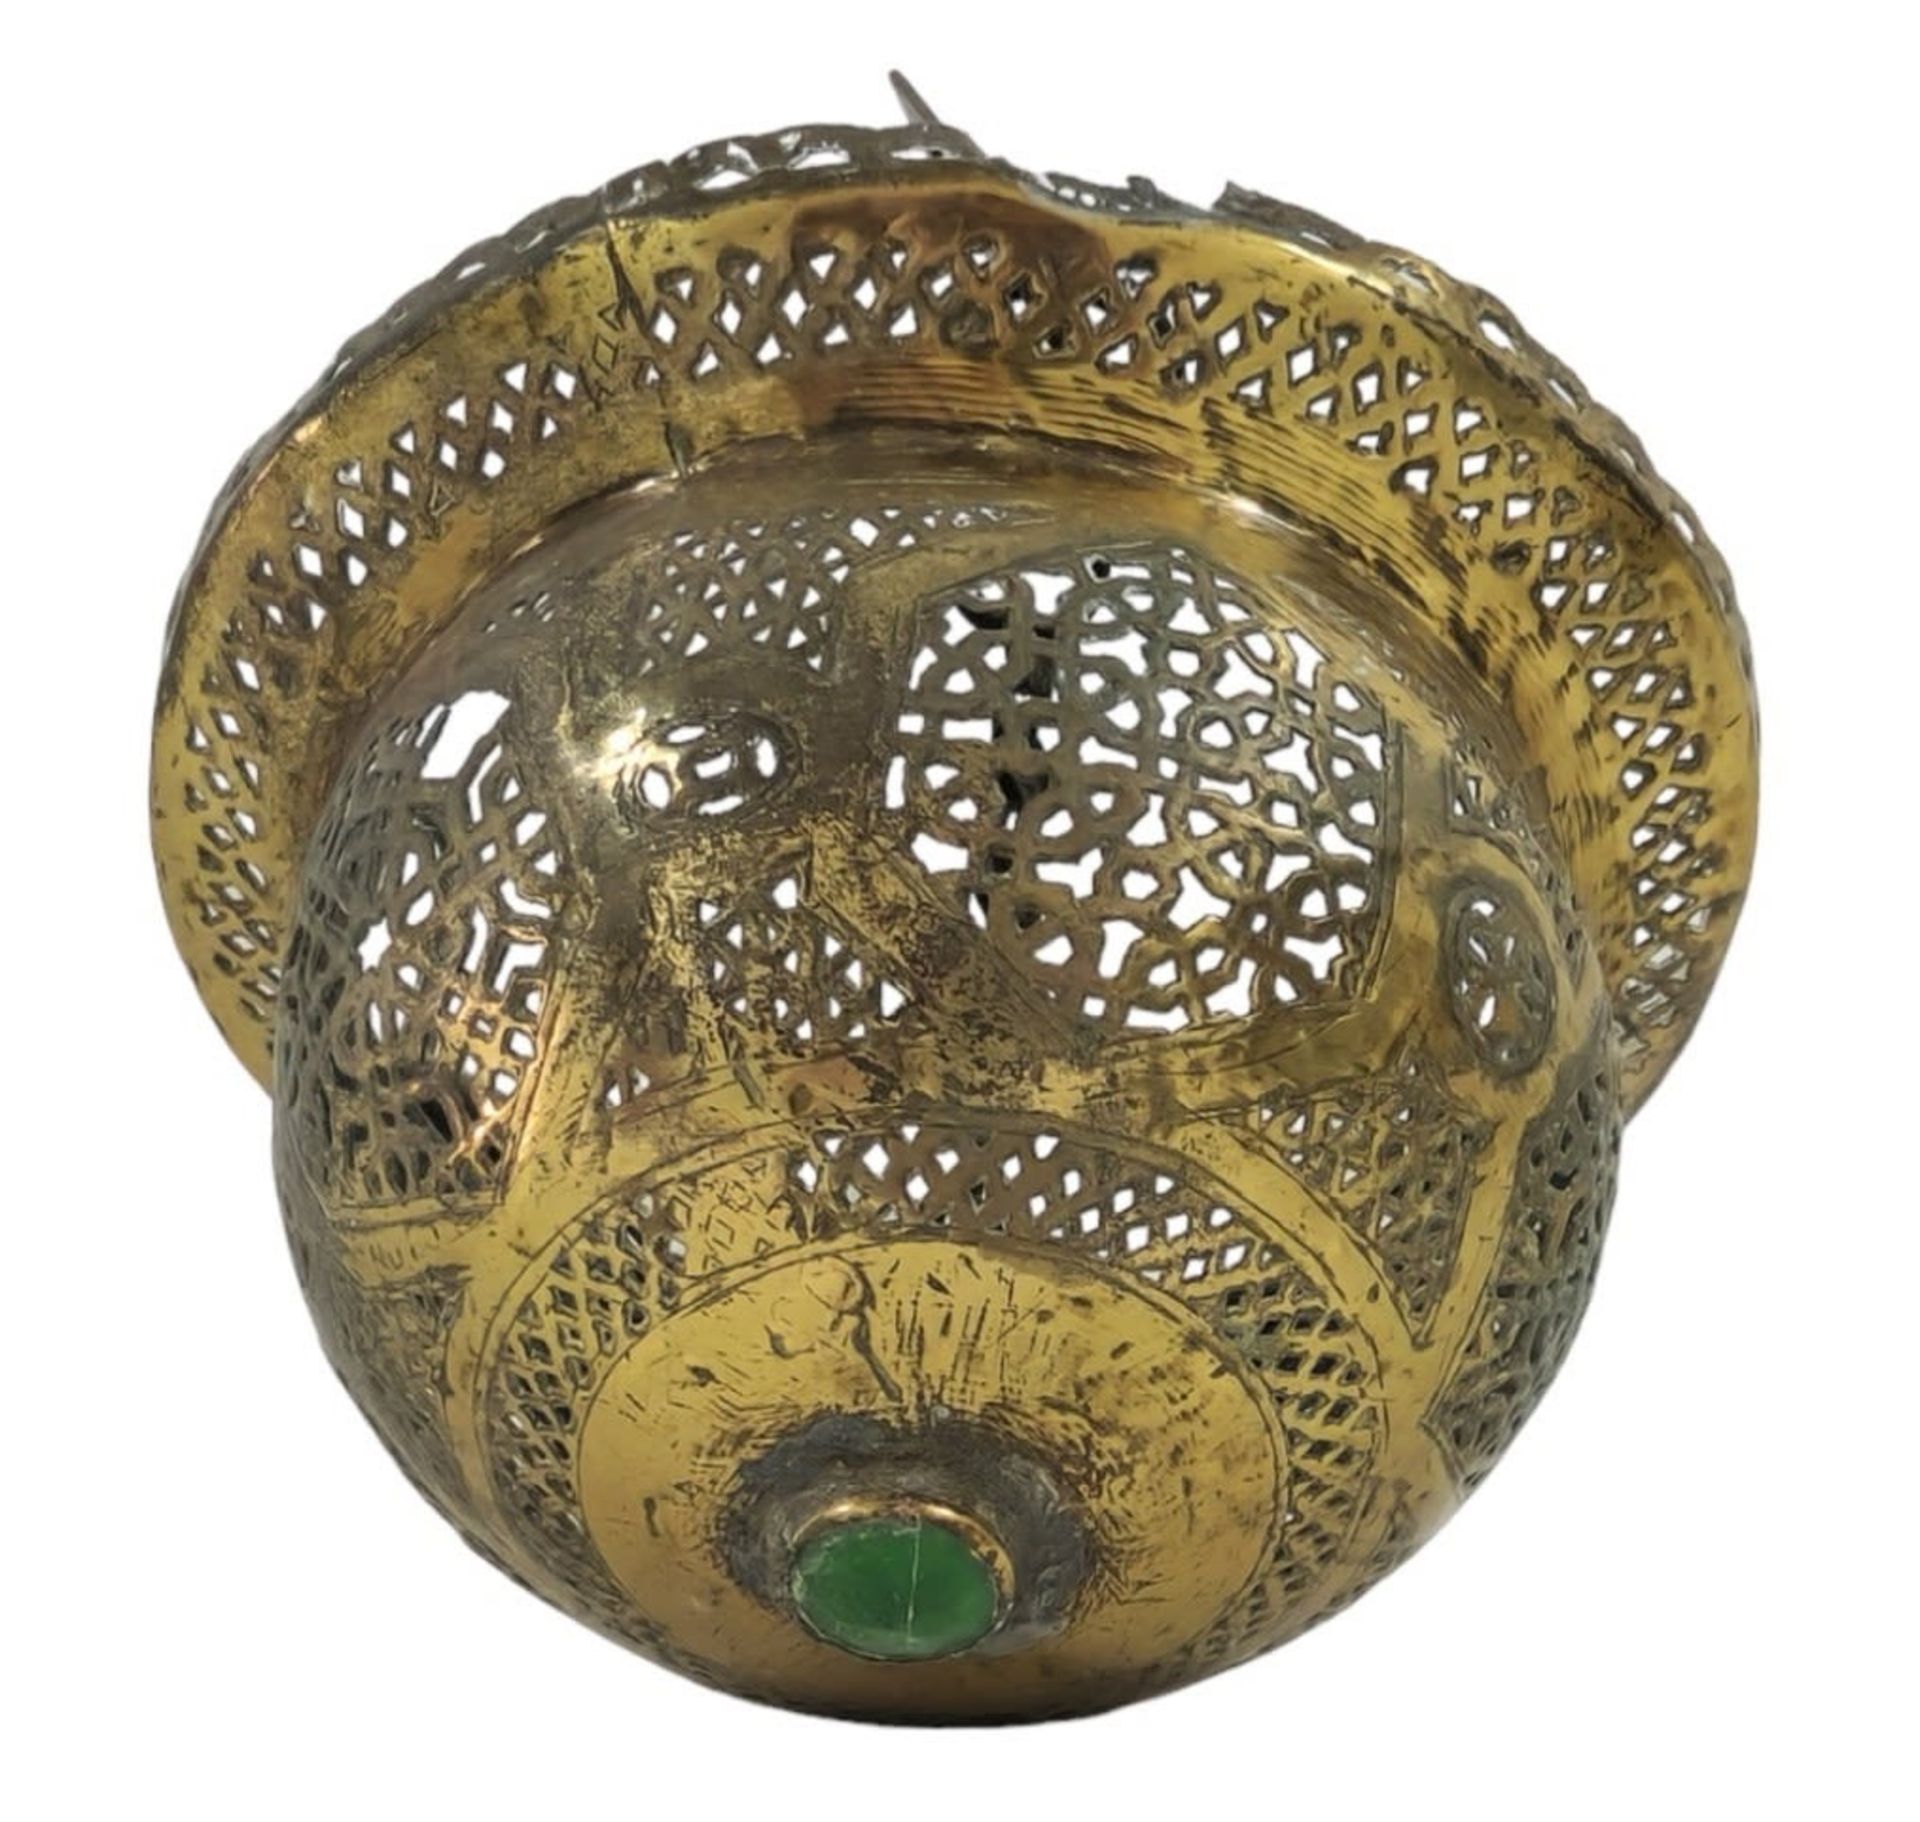 A pair of antique Islamic ceiling lamps, end of the 19th century, made of brass, decorated by hand - Image 4 of 5